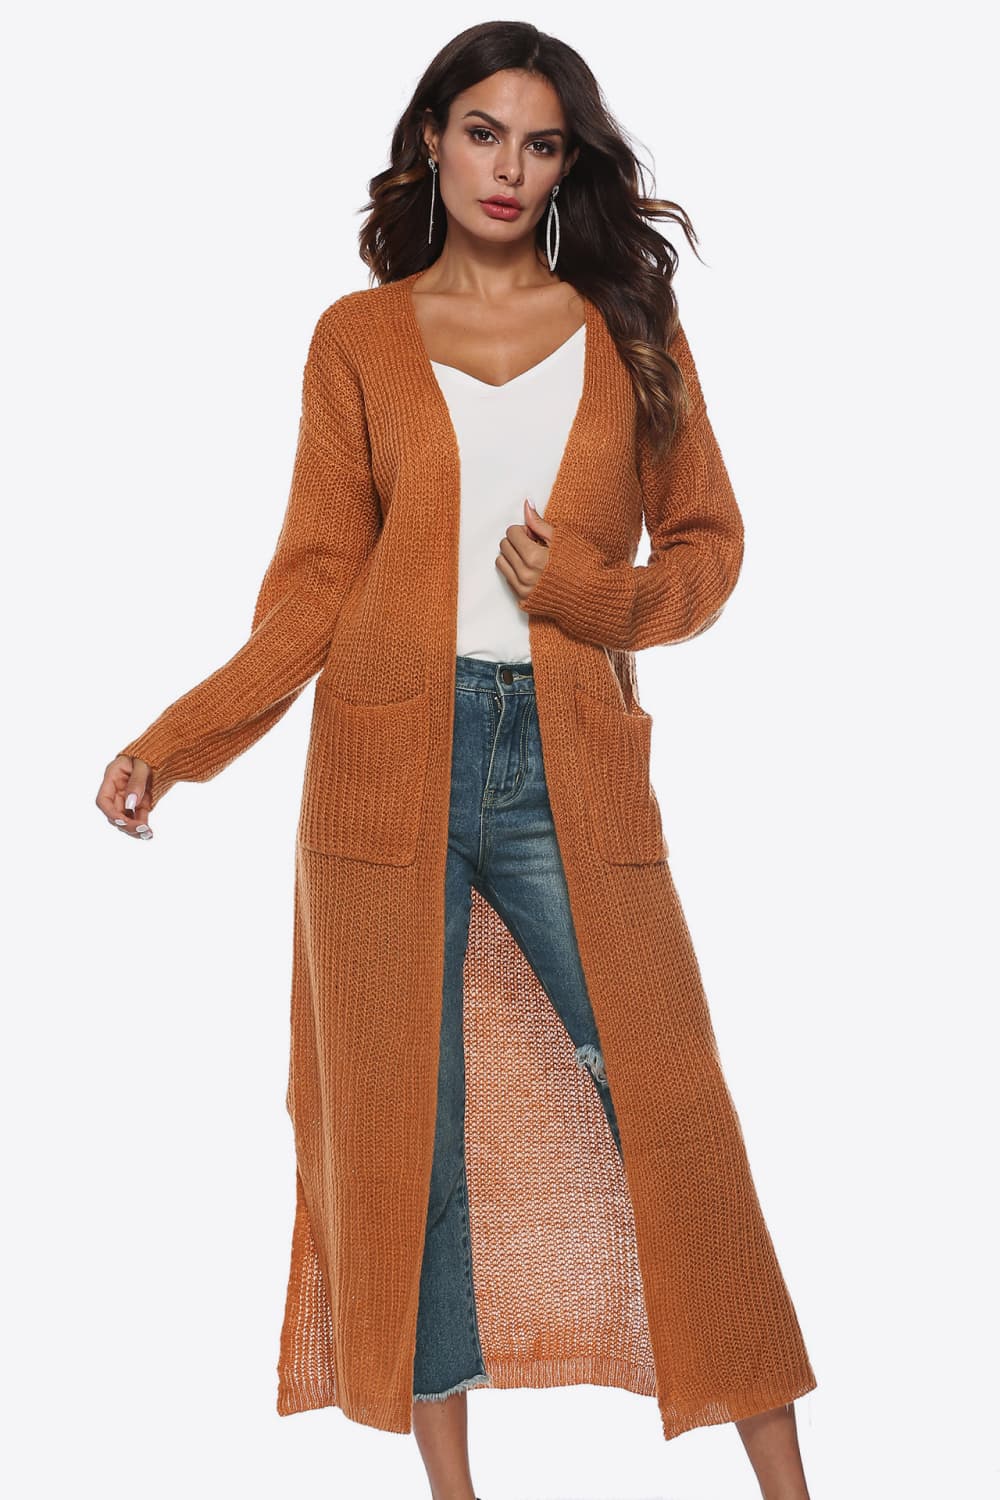 Long Sleeve Open Front Buttoned Cardigan - Orange / S - Women’s Clothing & Accessories - Shirts & Tops - 30 - 2024